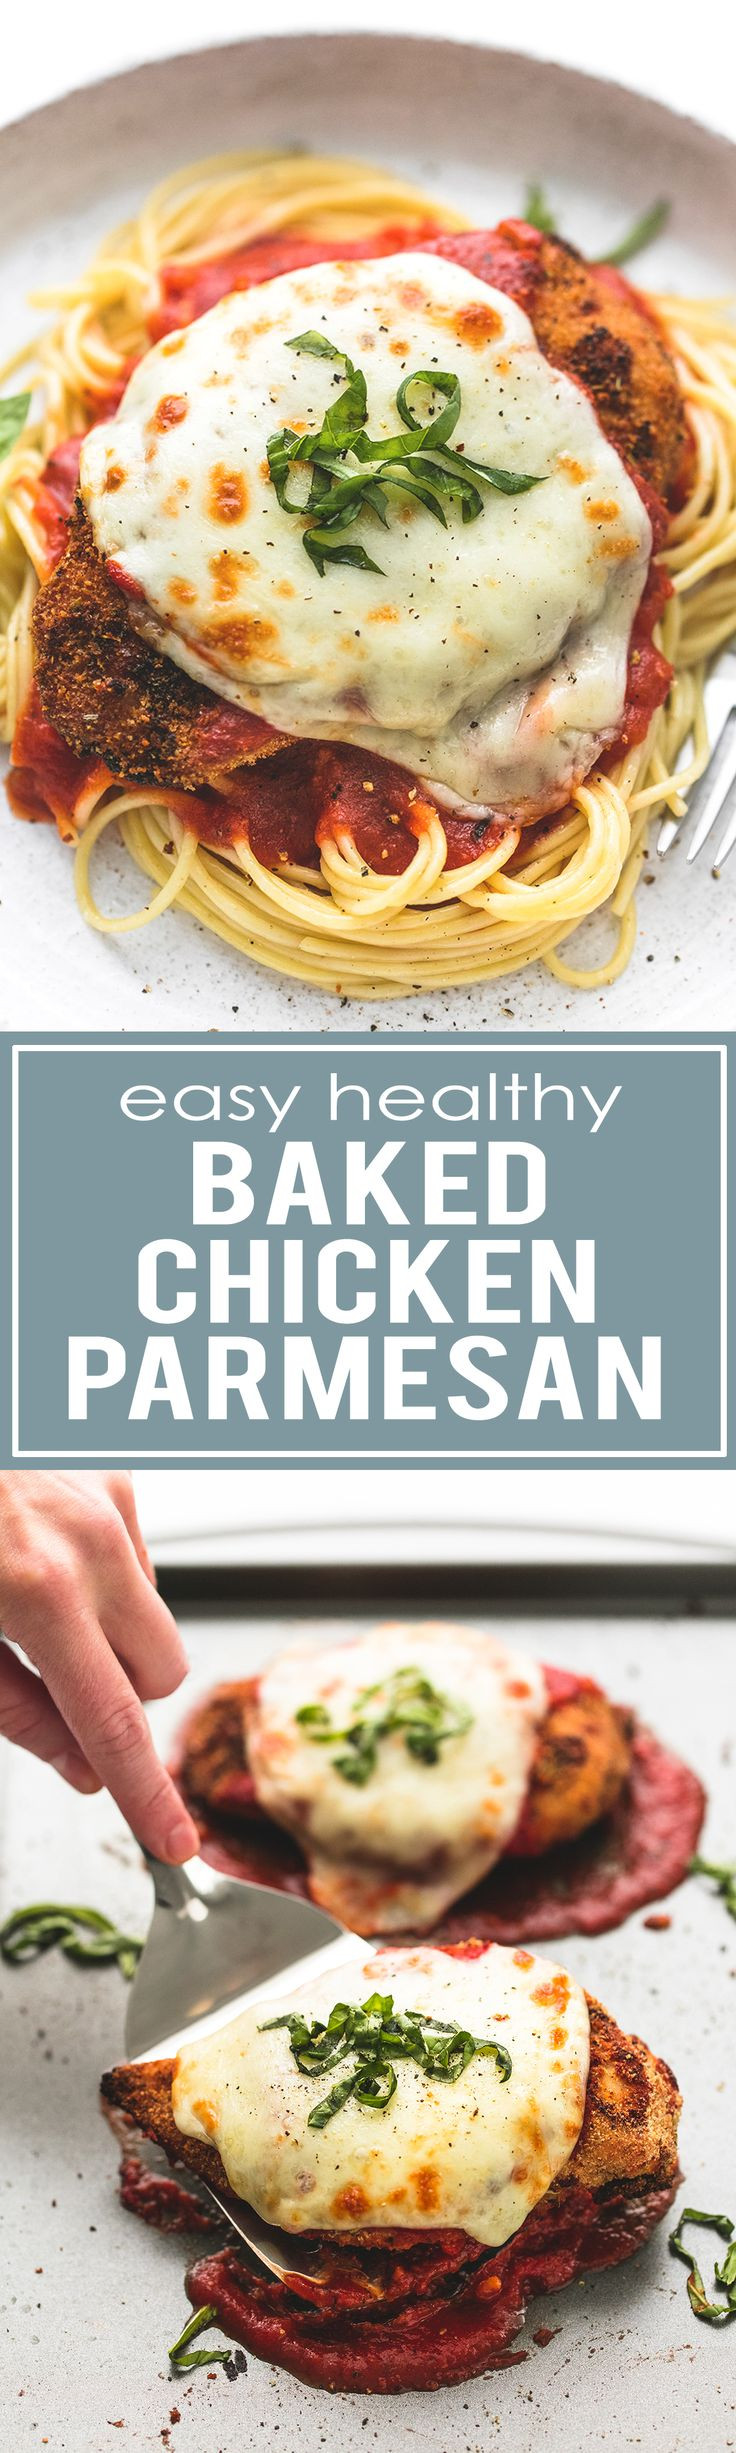 Easy Healthy Baked Chicken Recipes
 Easy Healthy Baked Chicken Parmesan